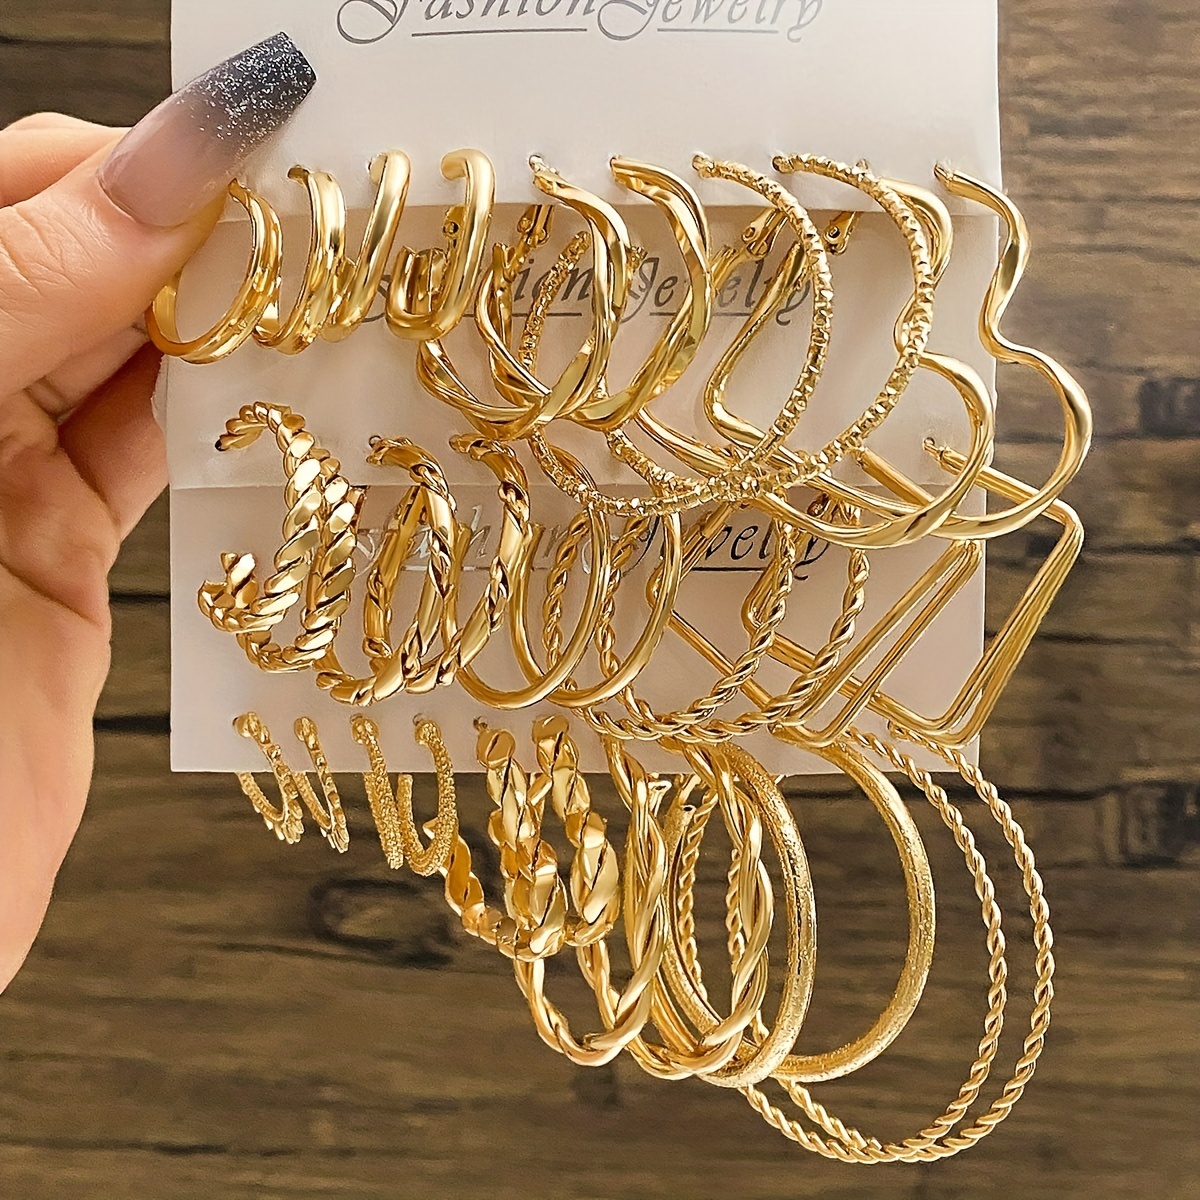 

16 Pairs Set Of Hoop Earrings Twisted Love Heart Geometric Square Design Alloy Jewelry Elegant Simple Style Big Set Gift For Women